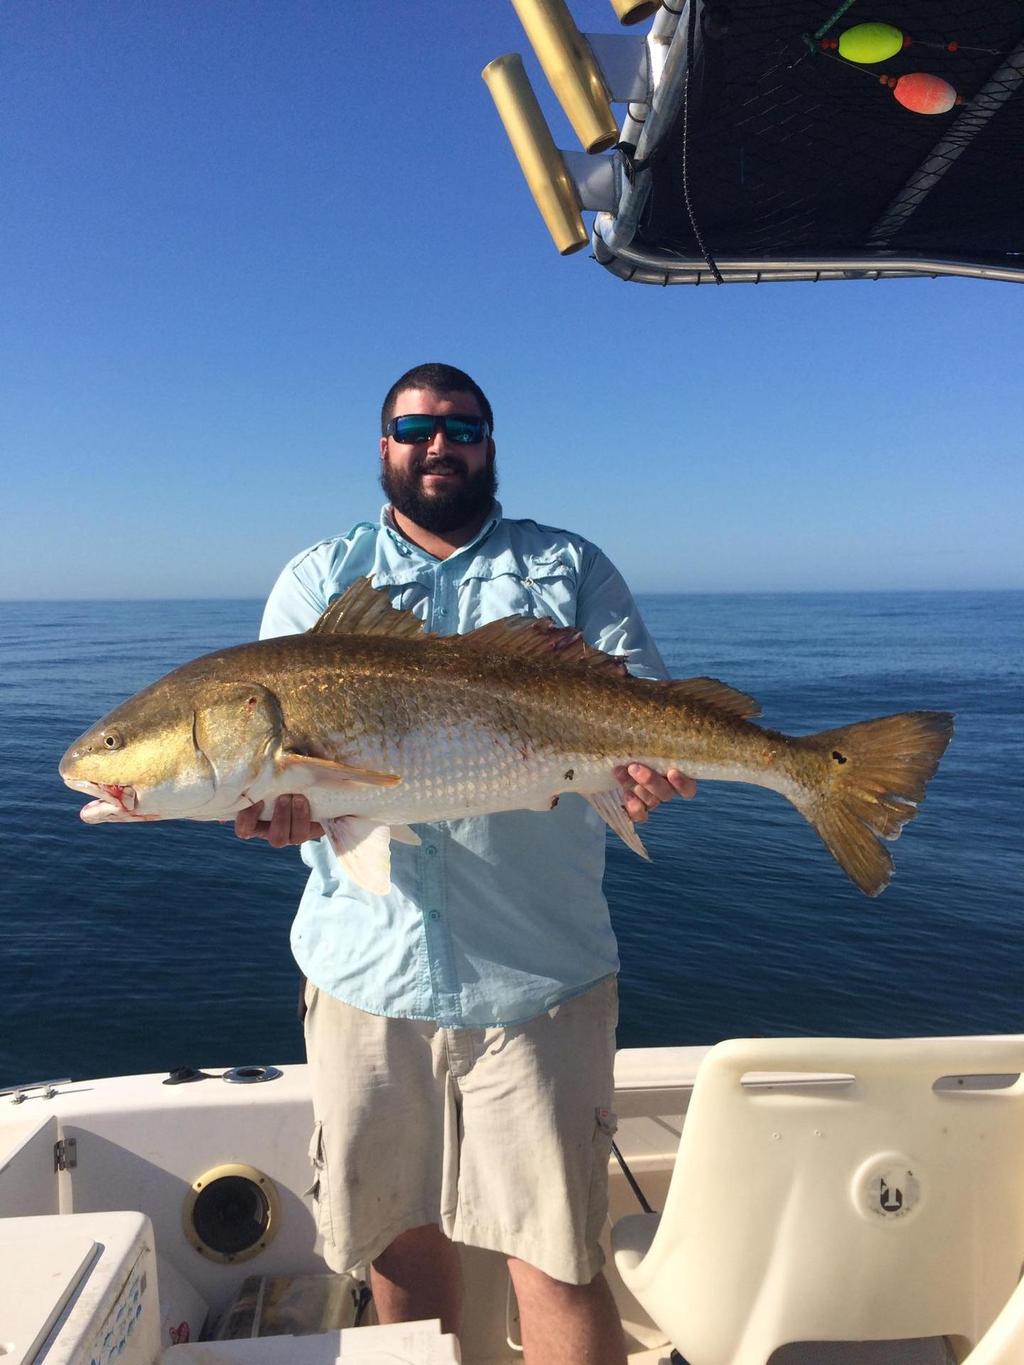 Richard Bickley caught this nice trophy red fish while fishing with Daryl Chandler at Gray s Reef.